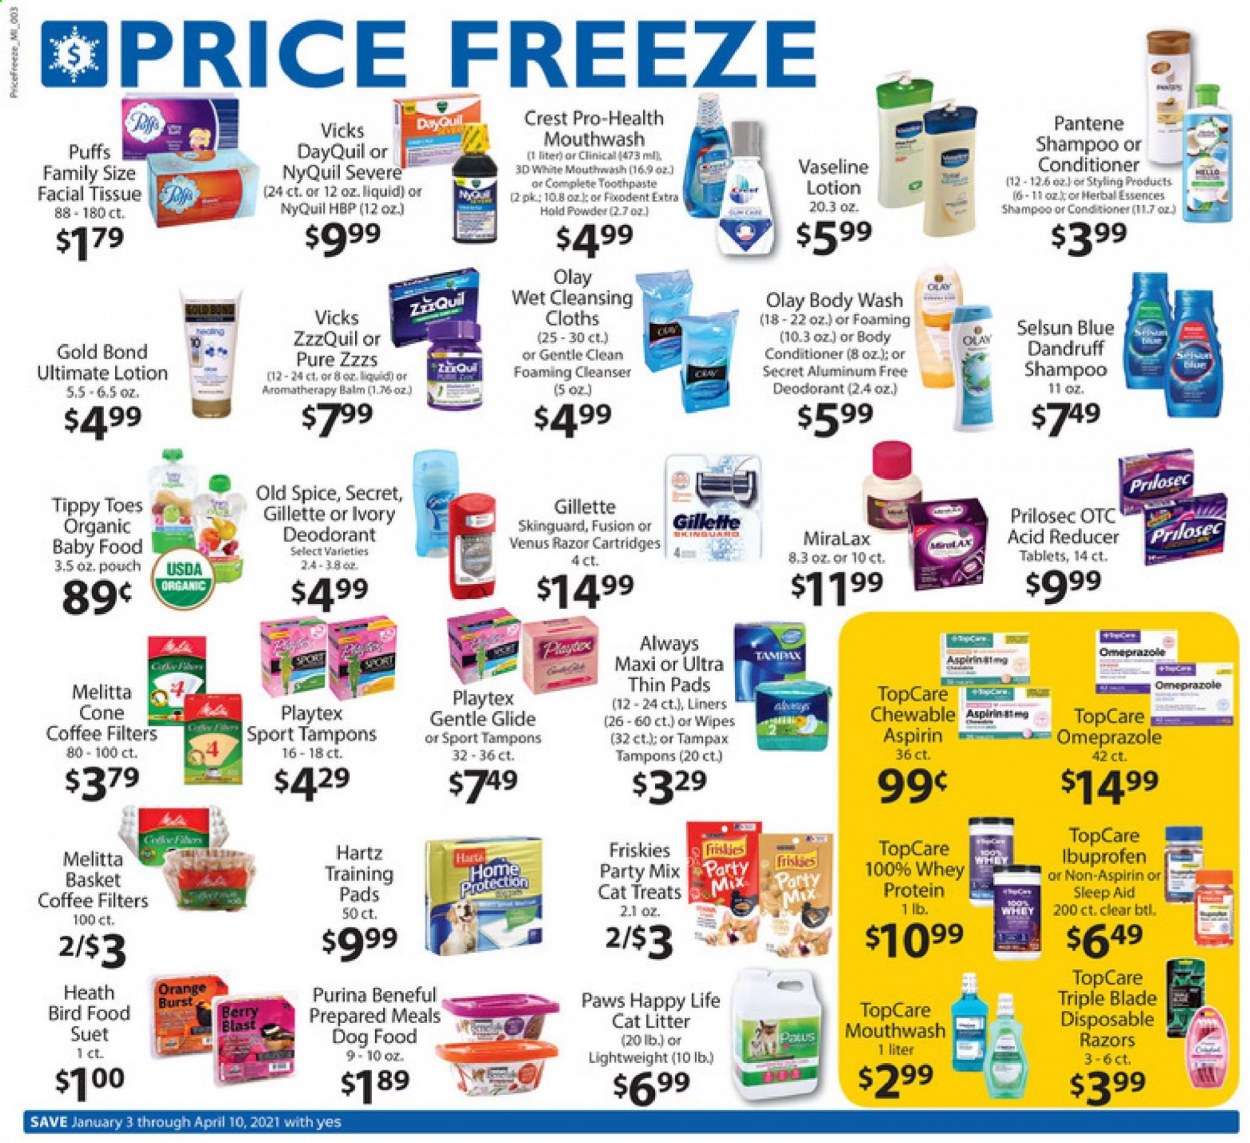 thumbnail - Family Fare Flyer - 01/03/2021 - 04/10/2021 - Sales products - puffs, oranges, suet, tissues, wipes, body wash, shampoo, Old Spice, Vaseline, toothpaste, mouthwash, Fixodent, Crest, Tampax, Playtex, tampons, cleanser, Olay, conditioner, Pantene, Herbal Essences, body lotion, anti-perspirant, deodorant, Gillette, Venus, disposable razor, Vicks, basket, DayQuil, MiraLAX, ZzzQuil, Ibuprofen, NyQuil, whey protein, aspirin. Page 3.